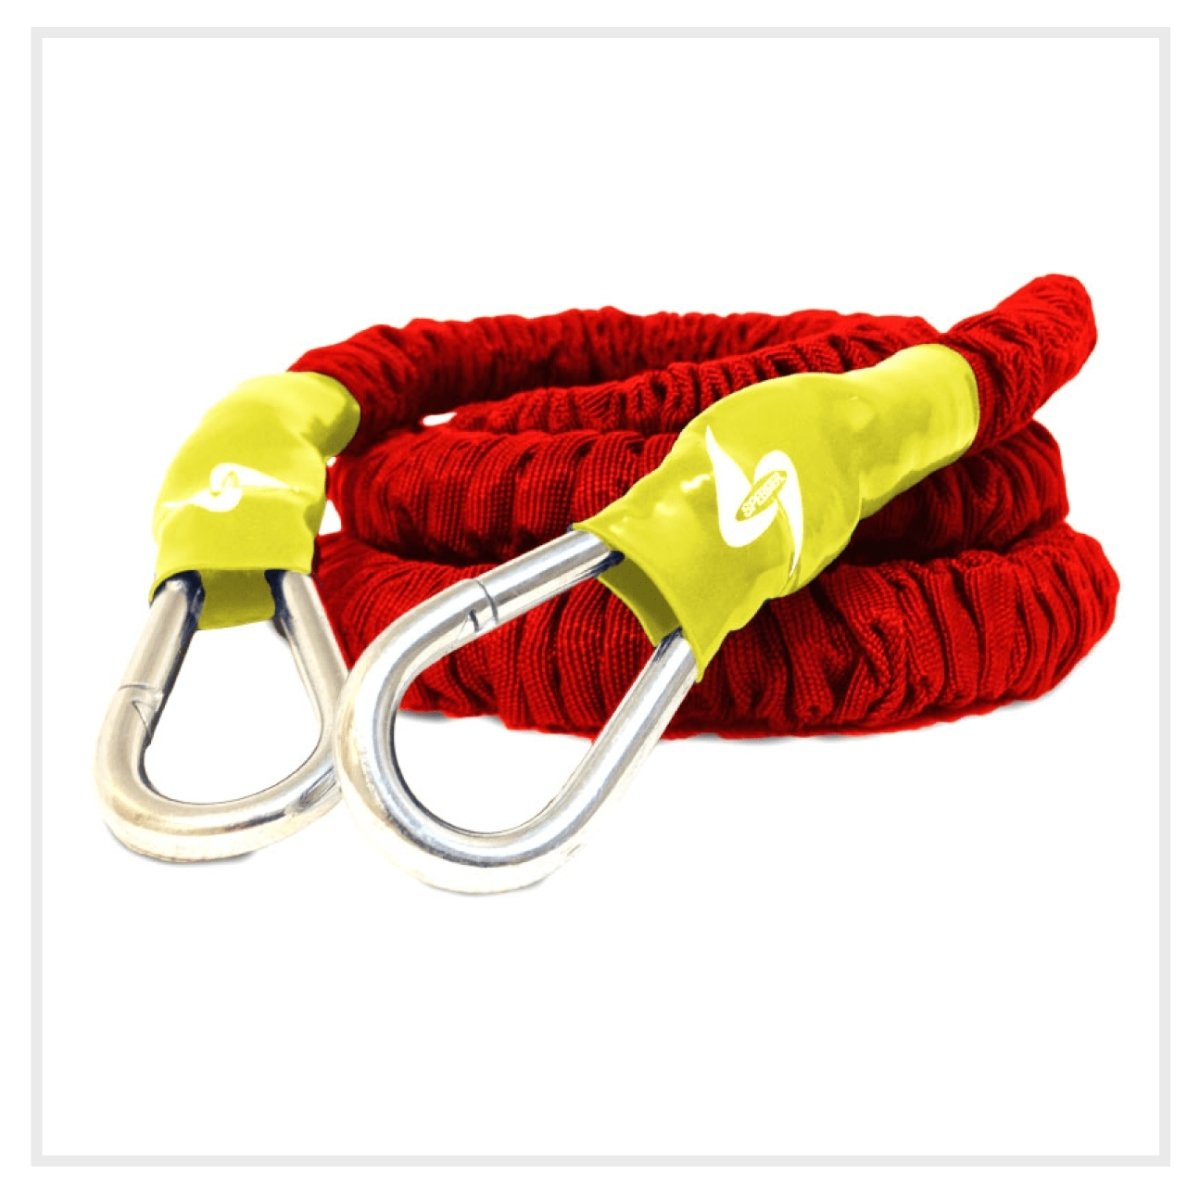 Rocket Bungee- Medium (10ft) best resistance bands made in USA and covered for safety - FitCord Resistance Bands